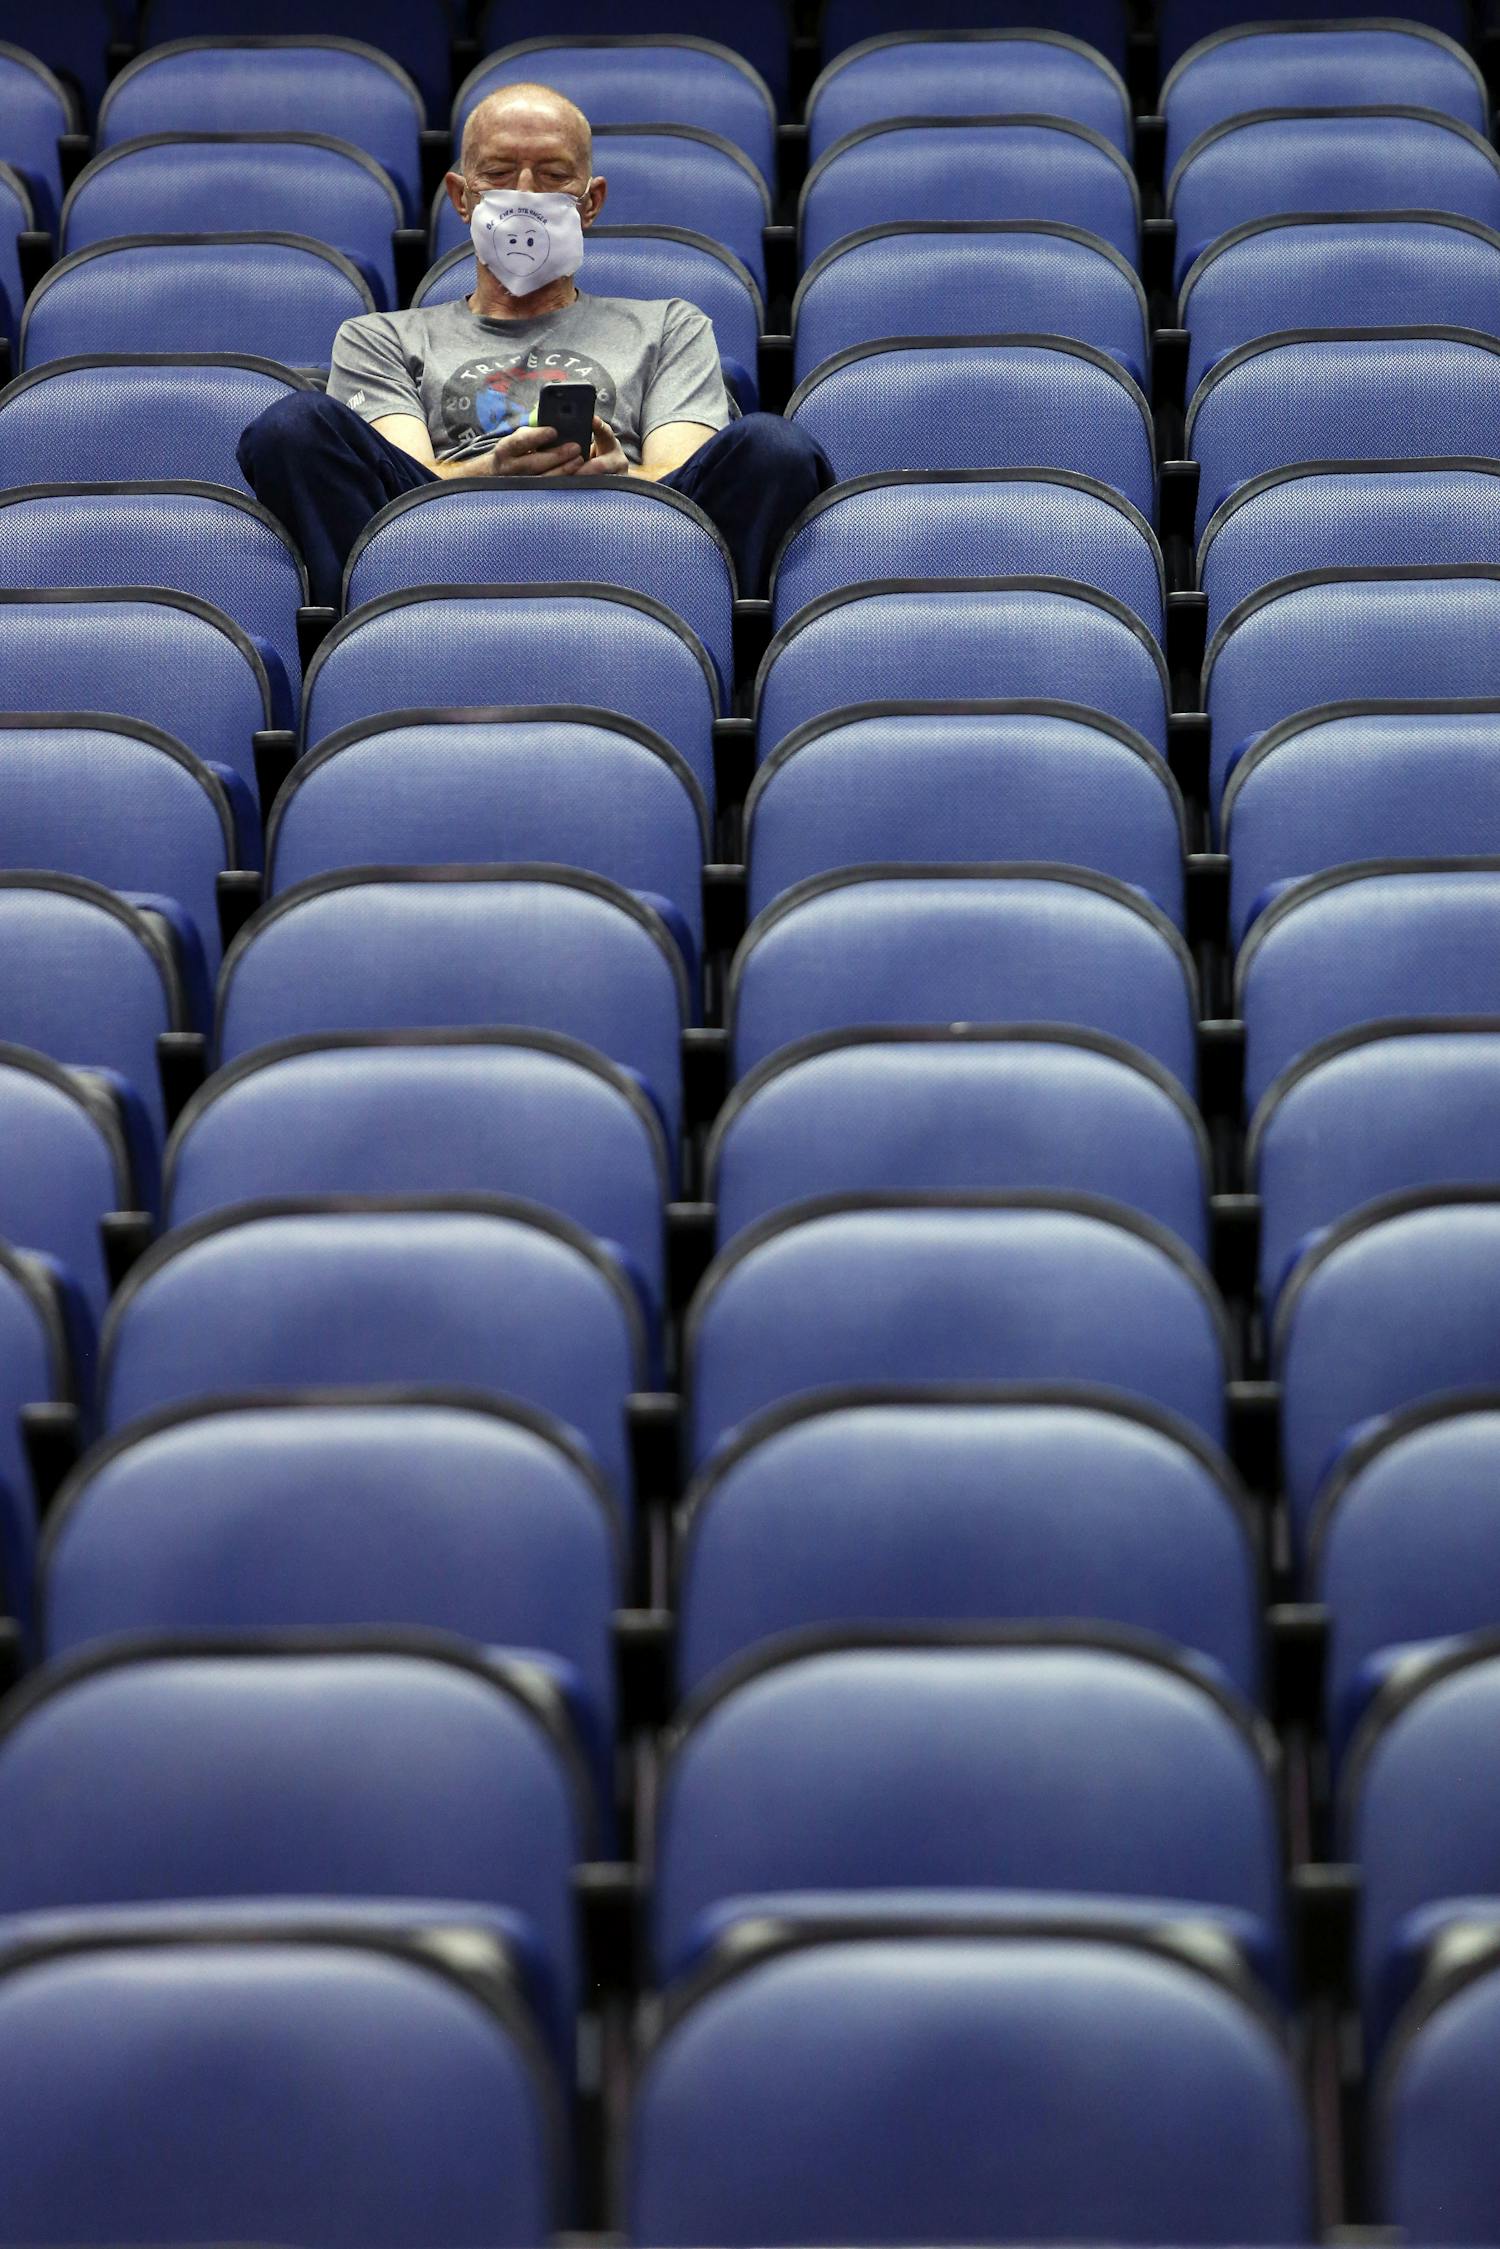 Mike Lemcke, from Richmond, Va., sits in an empty Greensboro Coliseum after the NCAA college basketball games were cancelled at the Atlantic Coast Conference tournament in Greensboro, N.C., Thursday, March 12, 2020. The biggest conferences in college sports all canceled their basketball tournaments because of the new coronavirus, seemingly putting the NCAA Tournament in doubt. (AP Photo/Ben McKeown)